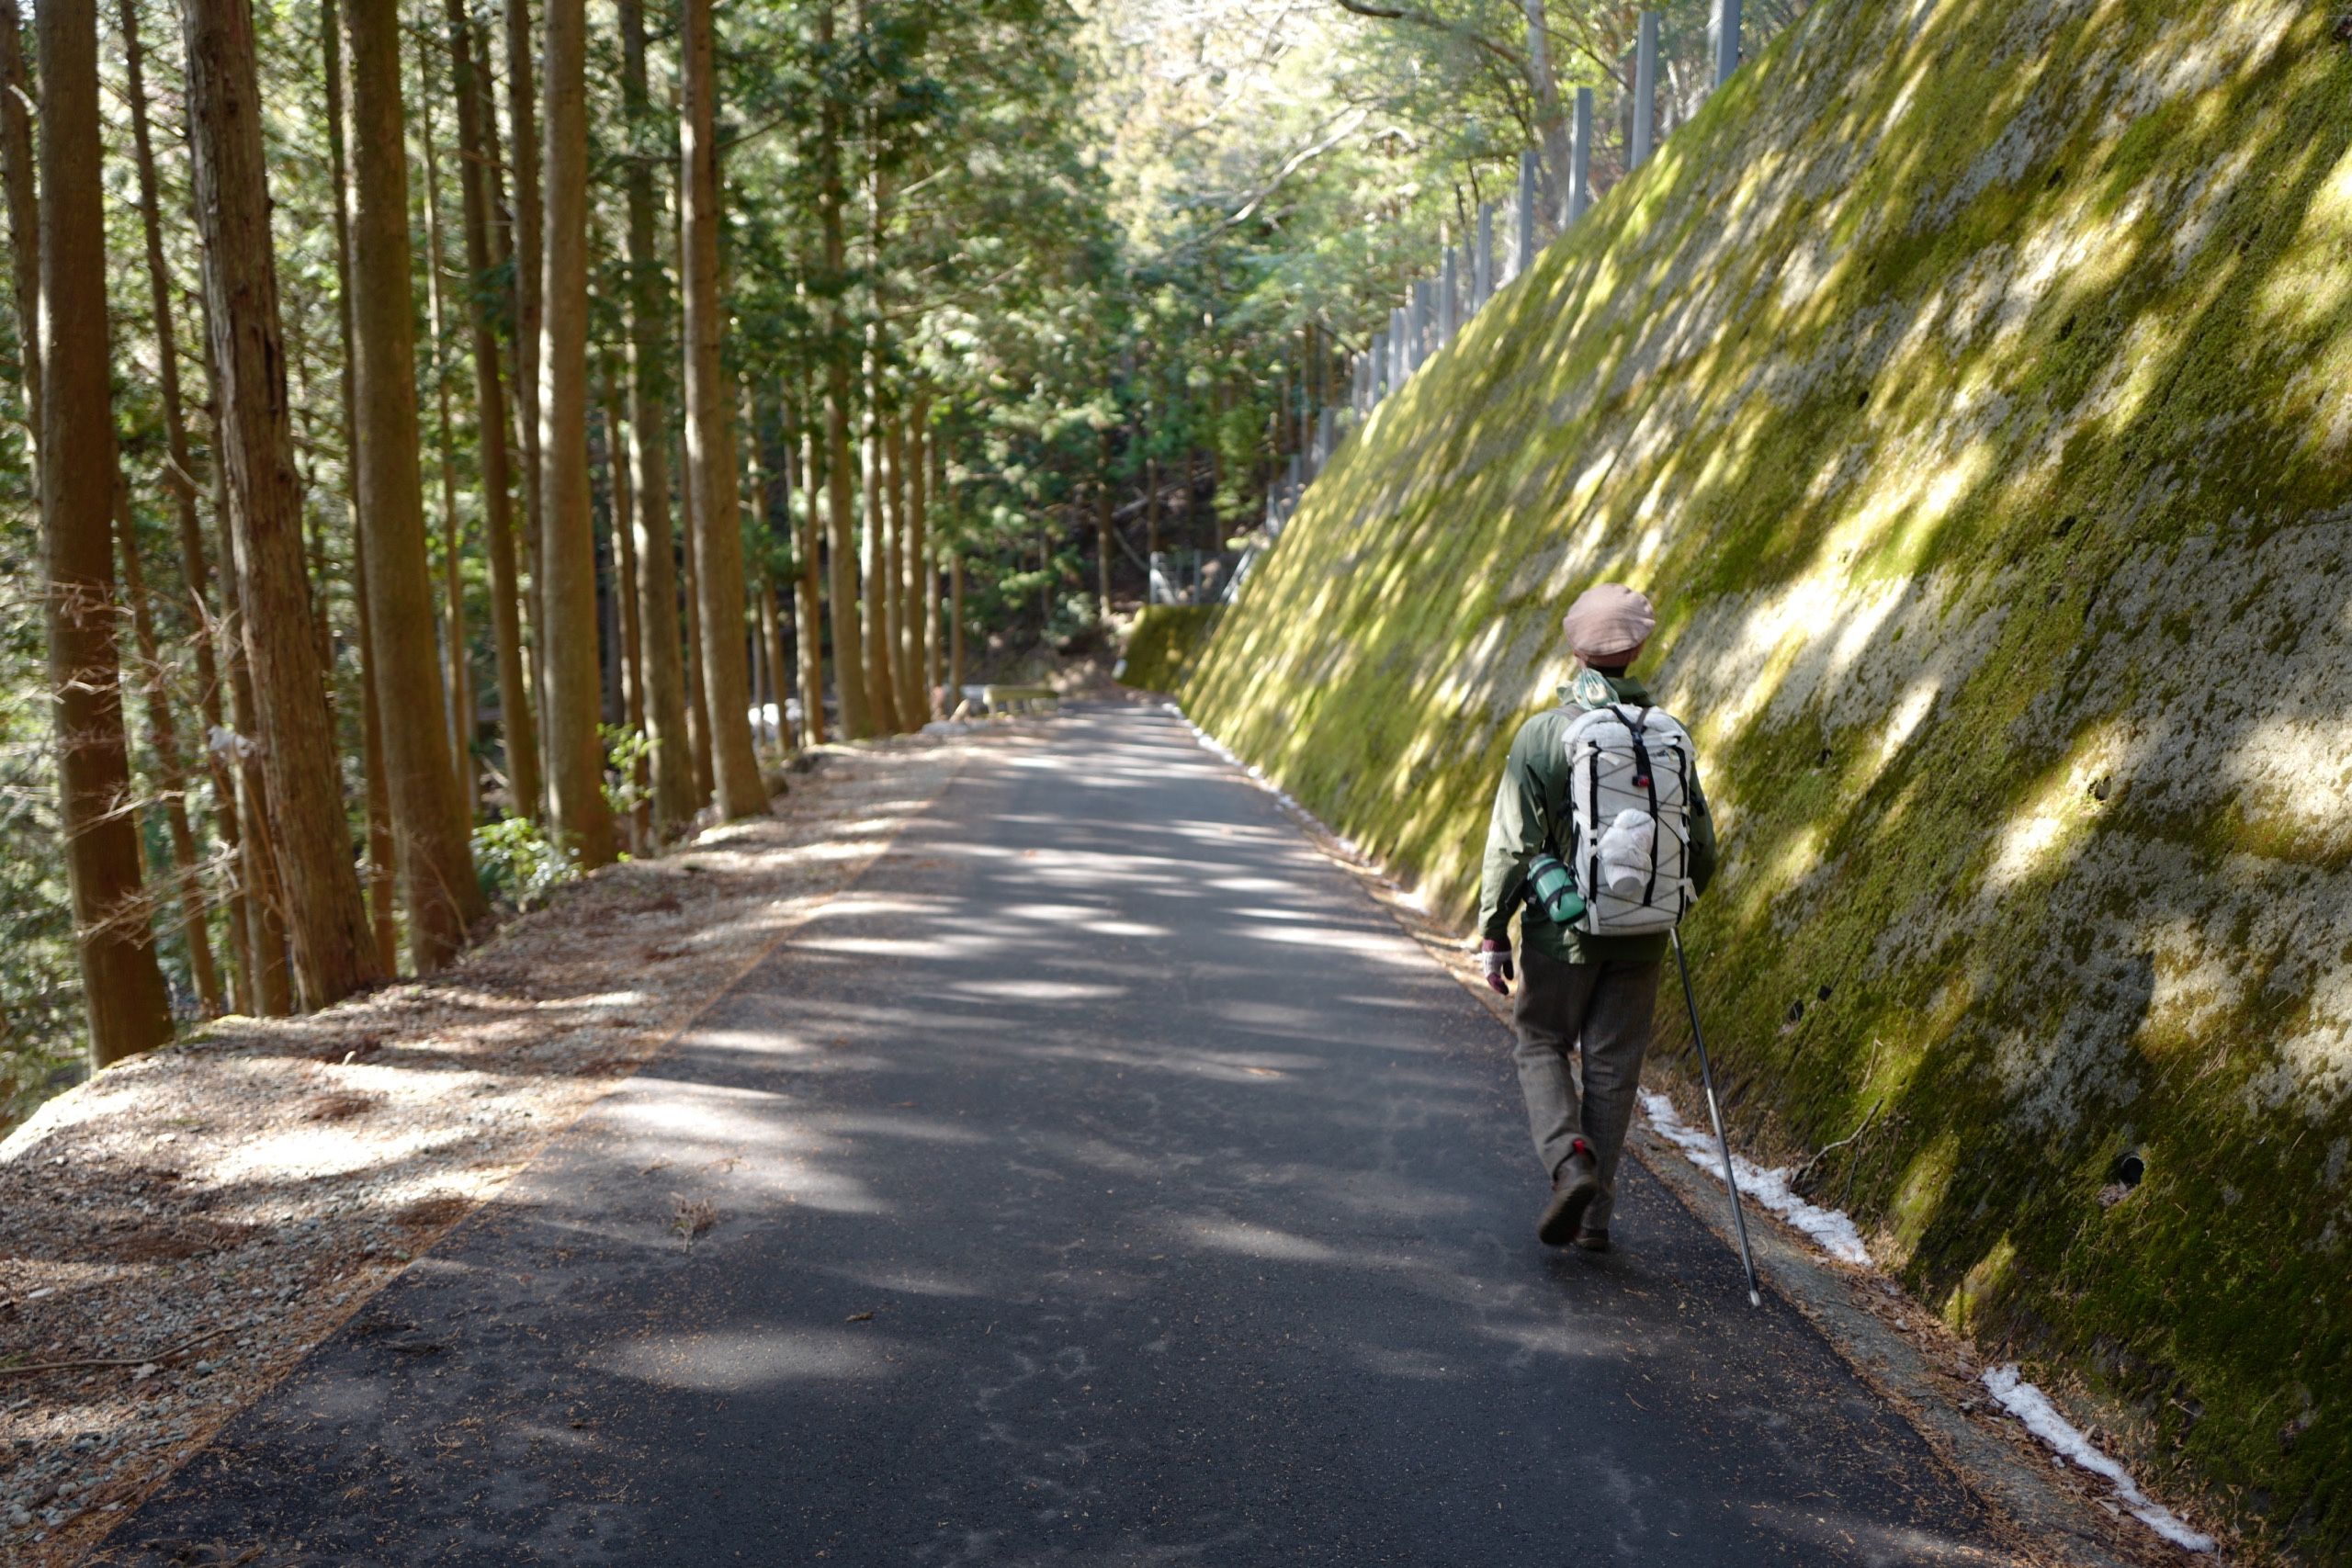 A man with a white rucksack, the author, walks down a mountain road in a cedar forest.